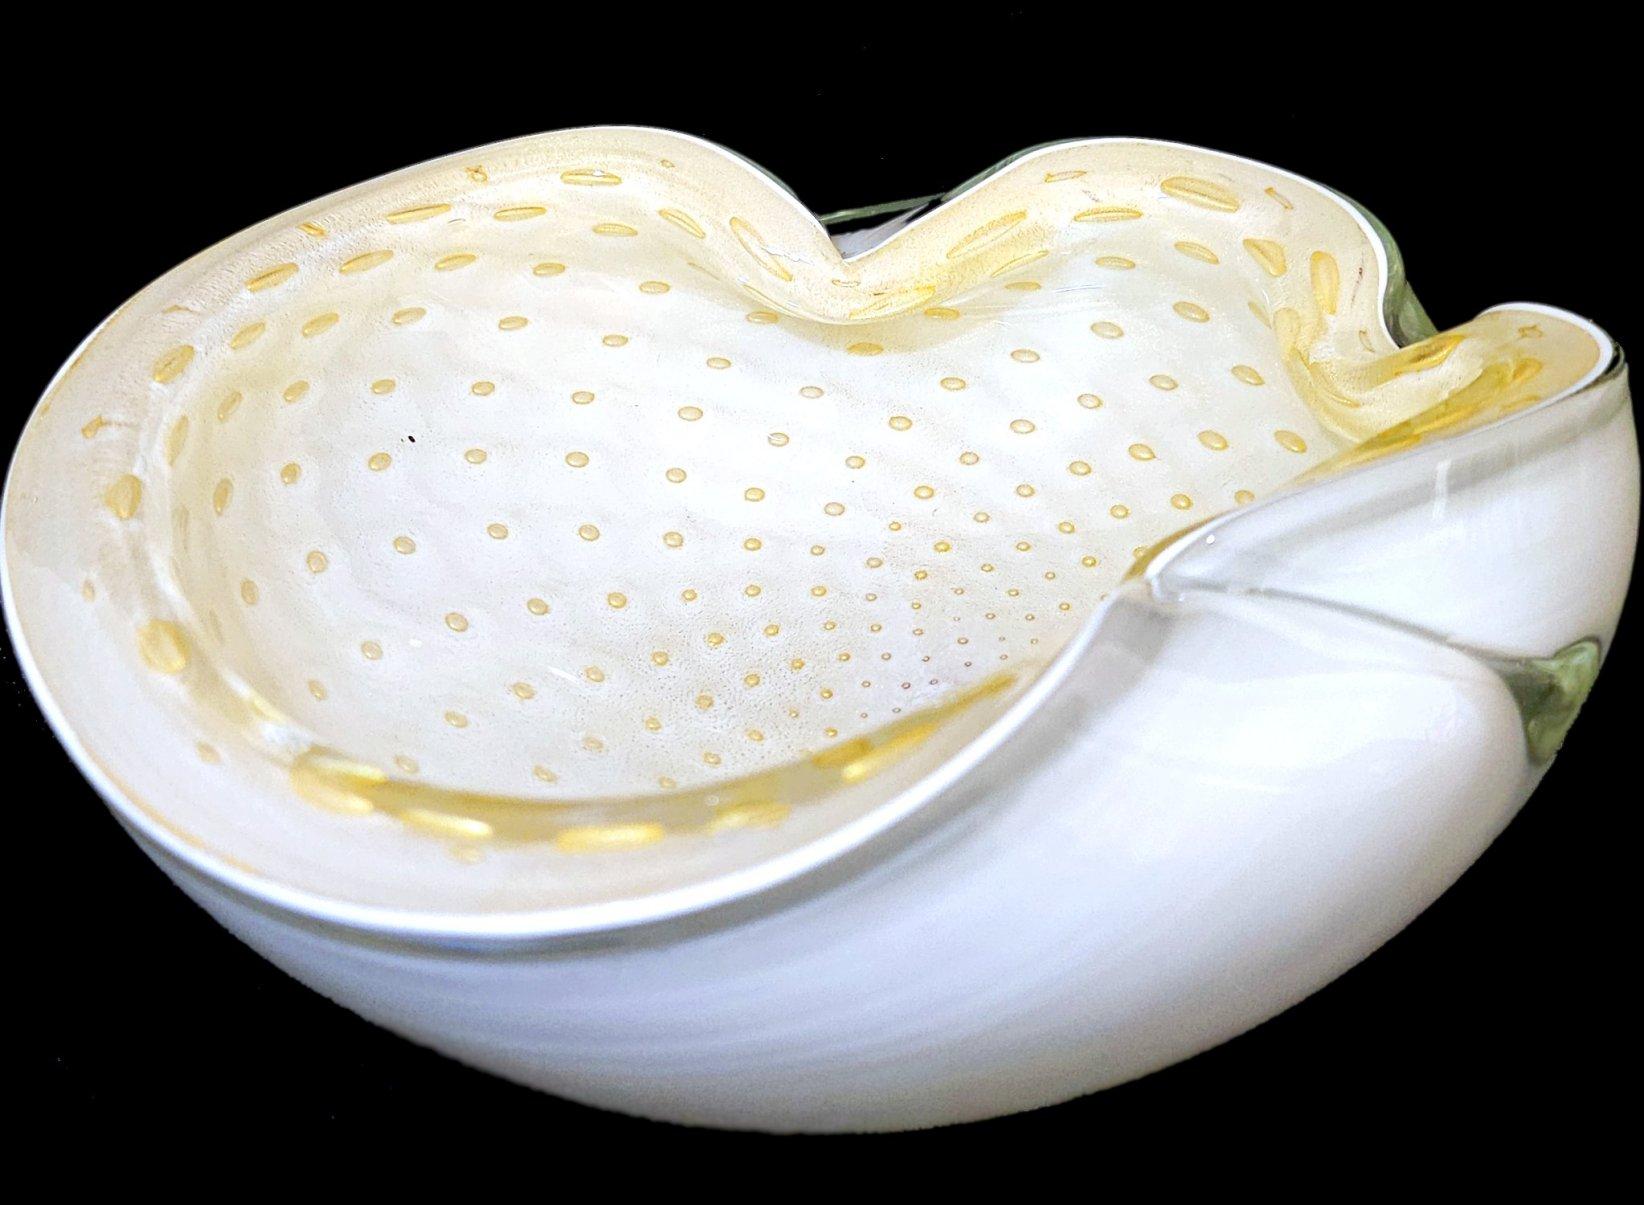 Alfredo Barbini Murano Glass Bullicante Bowl/Vide Poche with Gold Polveri
Measures about 7 x 7 x 2.25 inches.

Measurements are approximate and may vary throughout the piece. Please be aware that the color on your monitor and/or in your environment